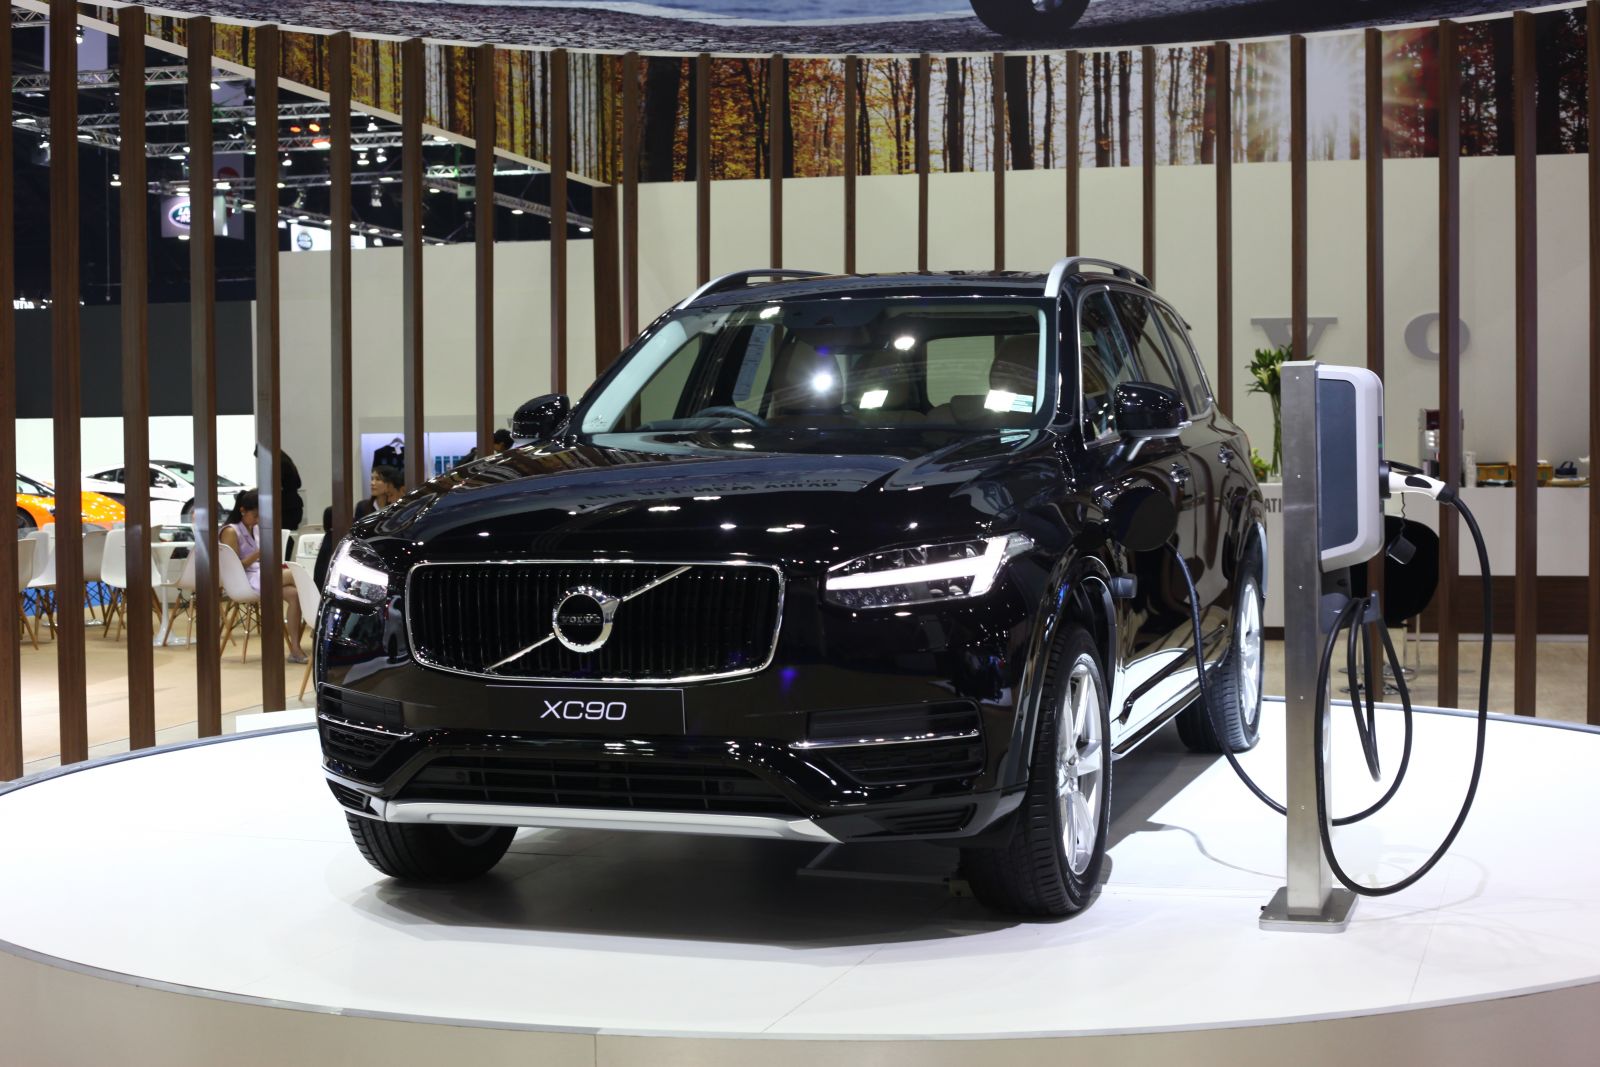 The all-new Volvo XC 90